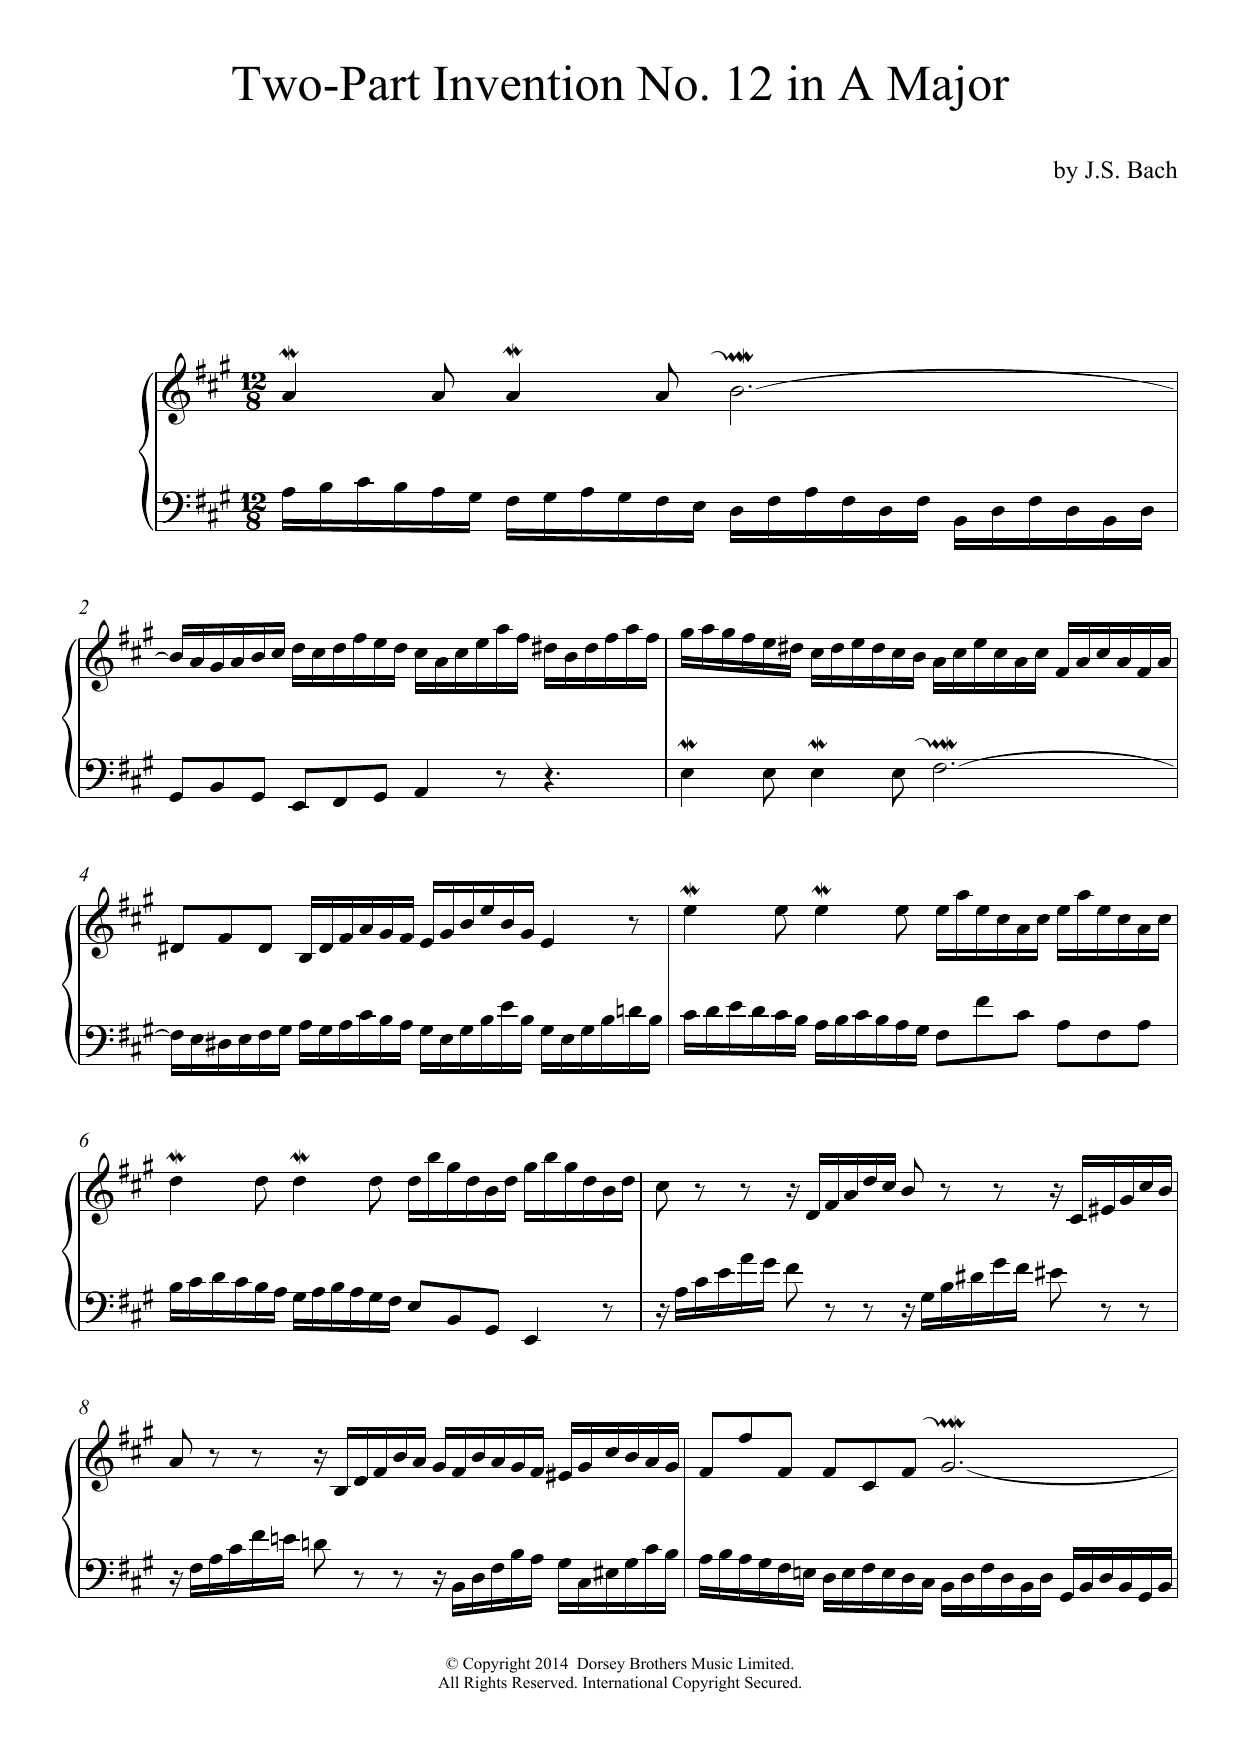 Download Johann Sebastian Bach Two-Part Invention No. 12 in A Major Sheet Music